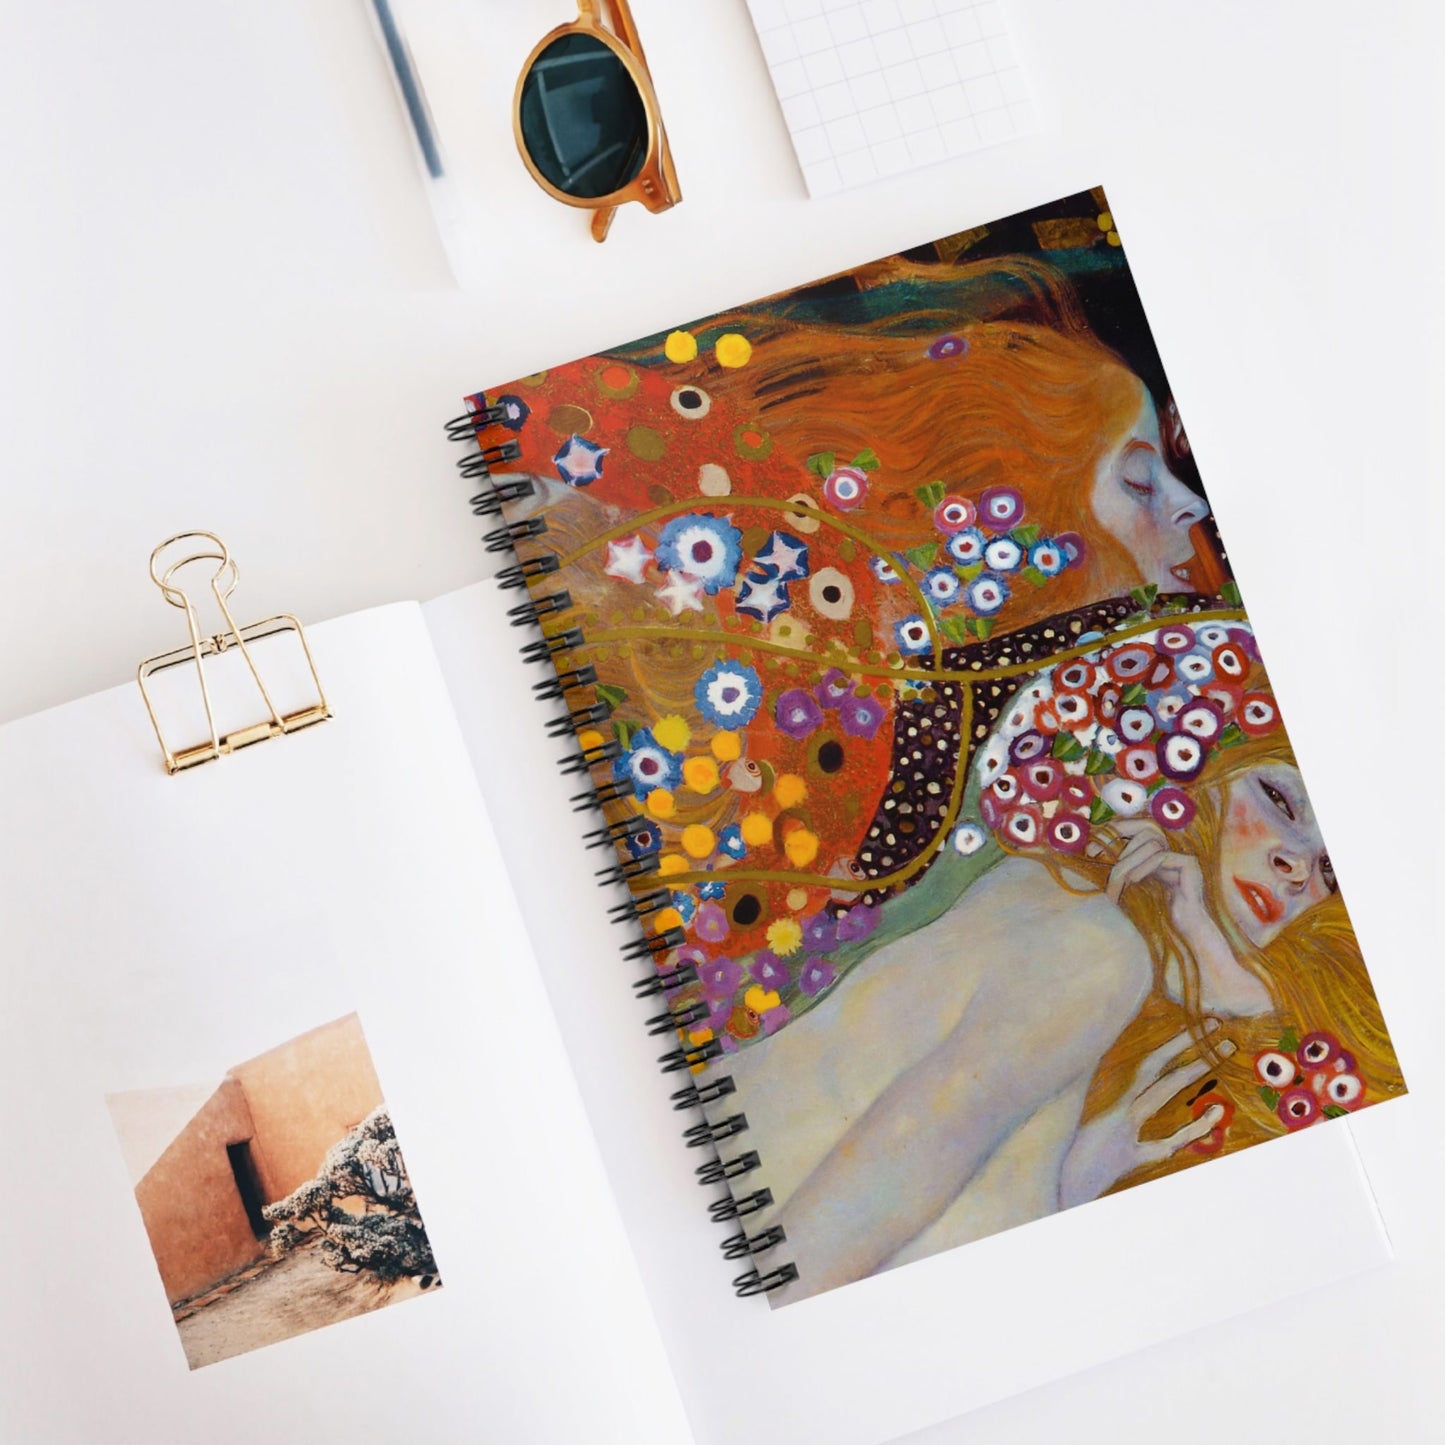 Abstract Women and Flowers Spiral Notebook Displayed on Desk